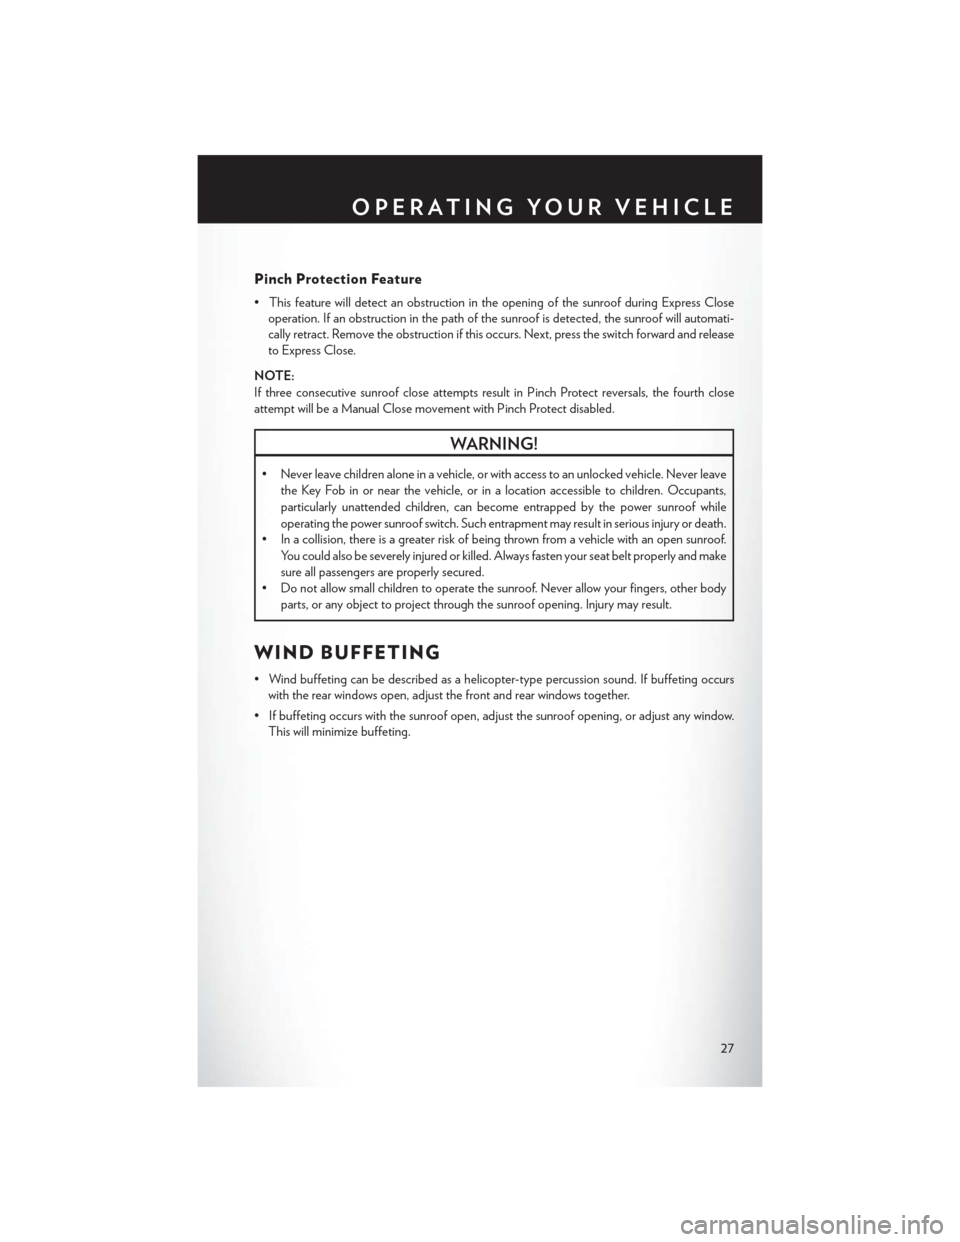 CHRYSLER 200 2014 1.G User Guide Pinch Protection Feature
• This feature will detect an obstruction in the opening of the sunroof during Express Closeoperation. If an obstruction in the path of the sunroof is detected, the sunroof 